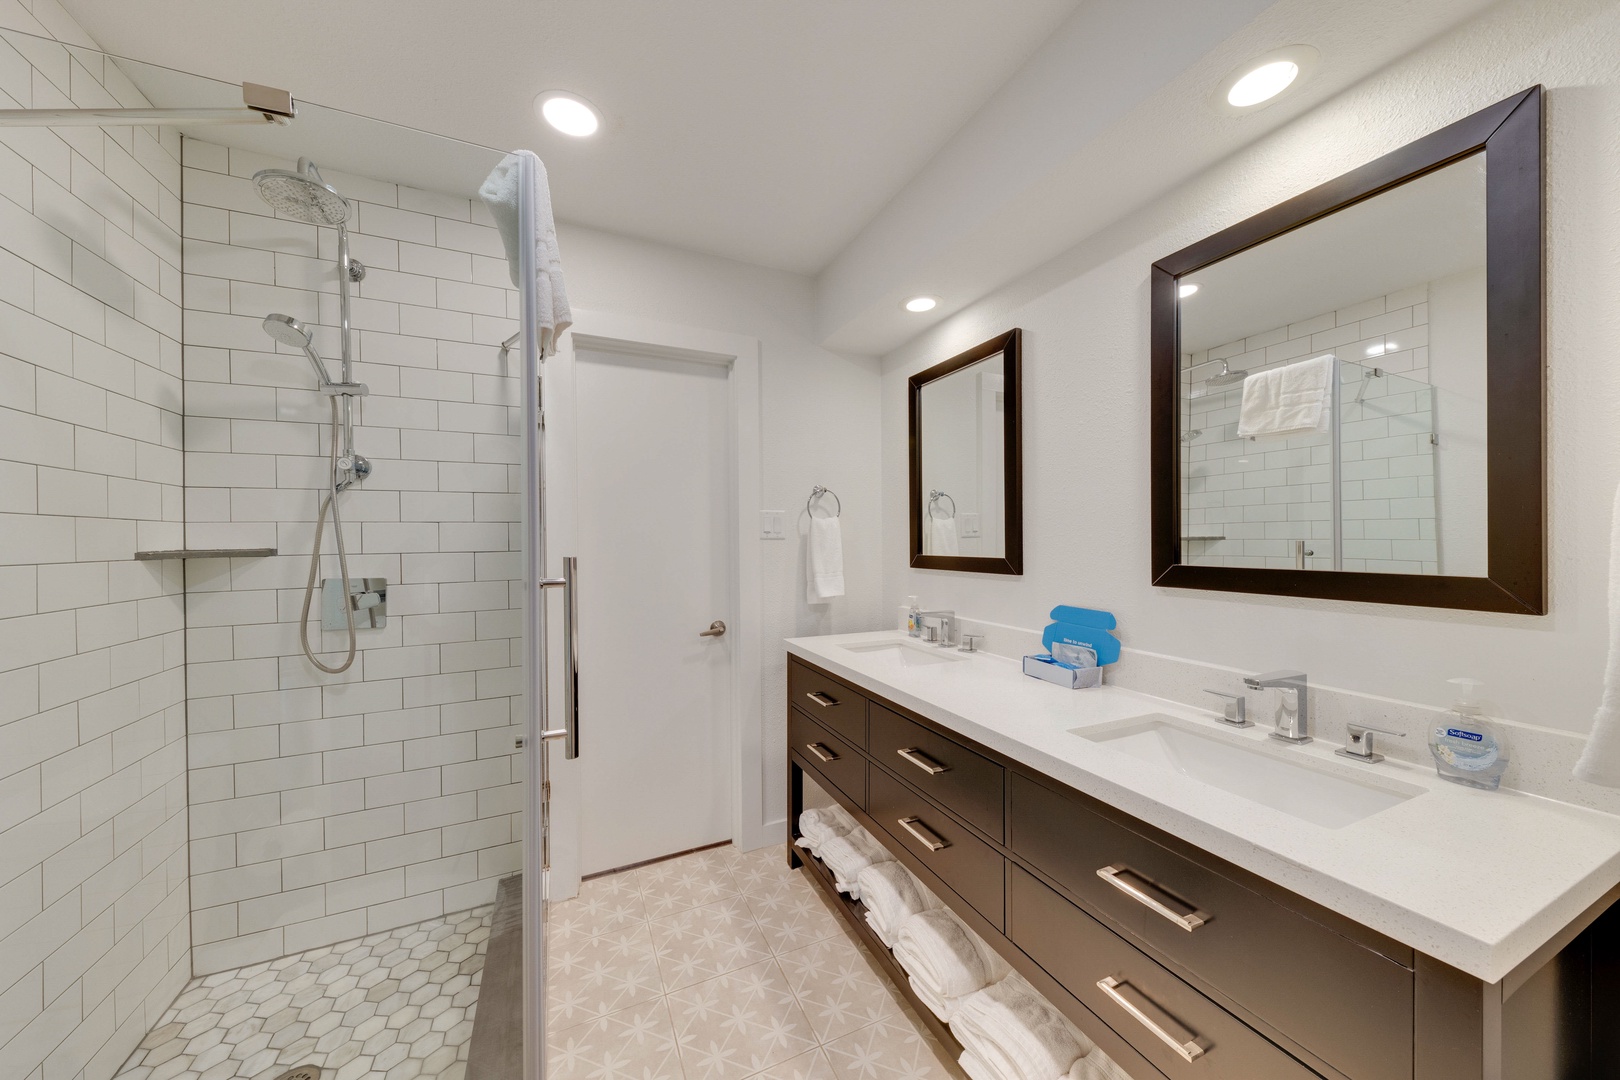 The pass-through bath off the master suite offers a double vanity & shower